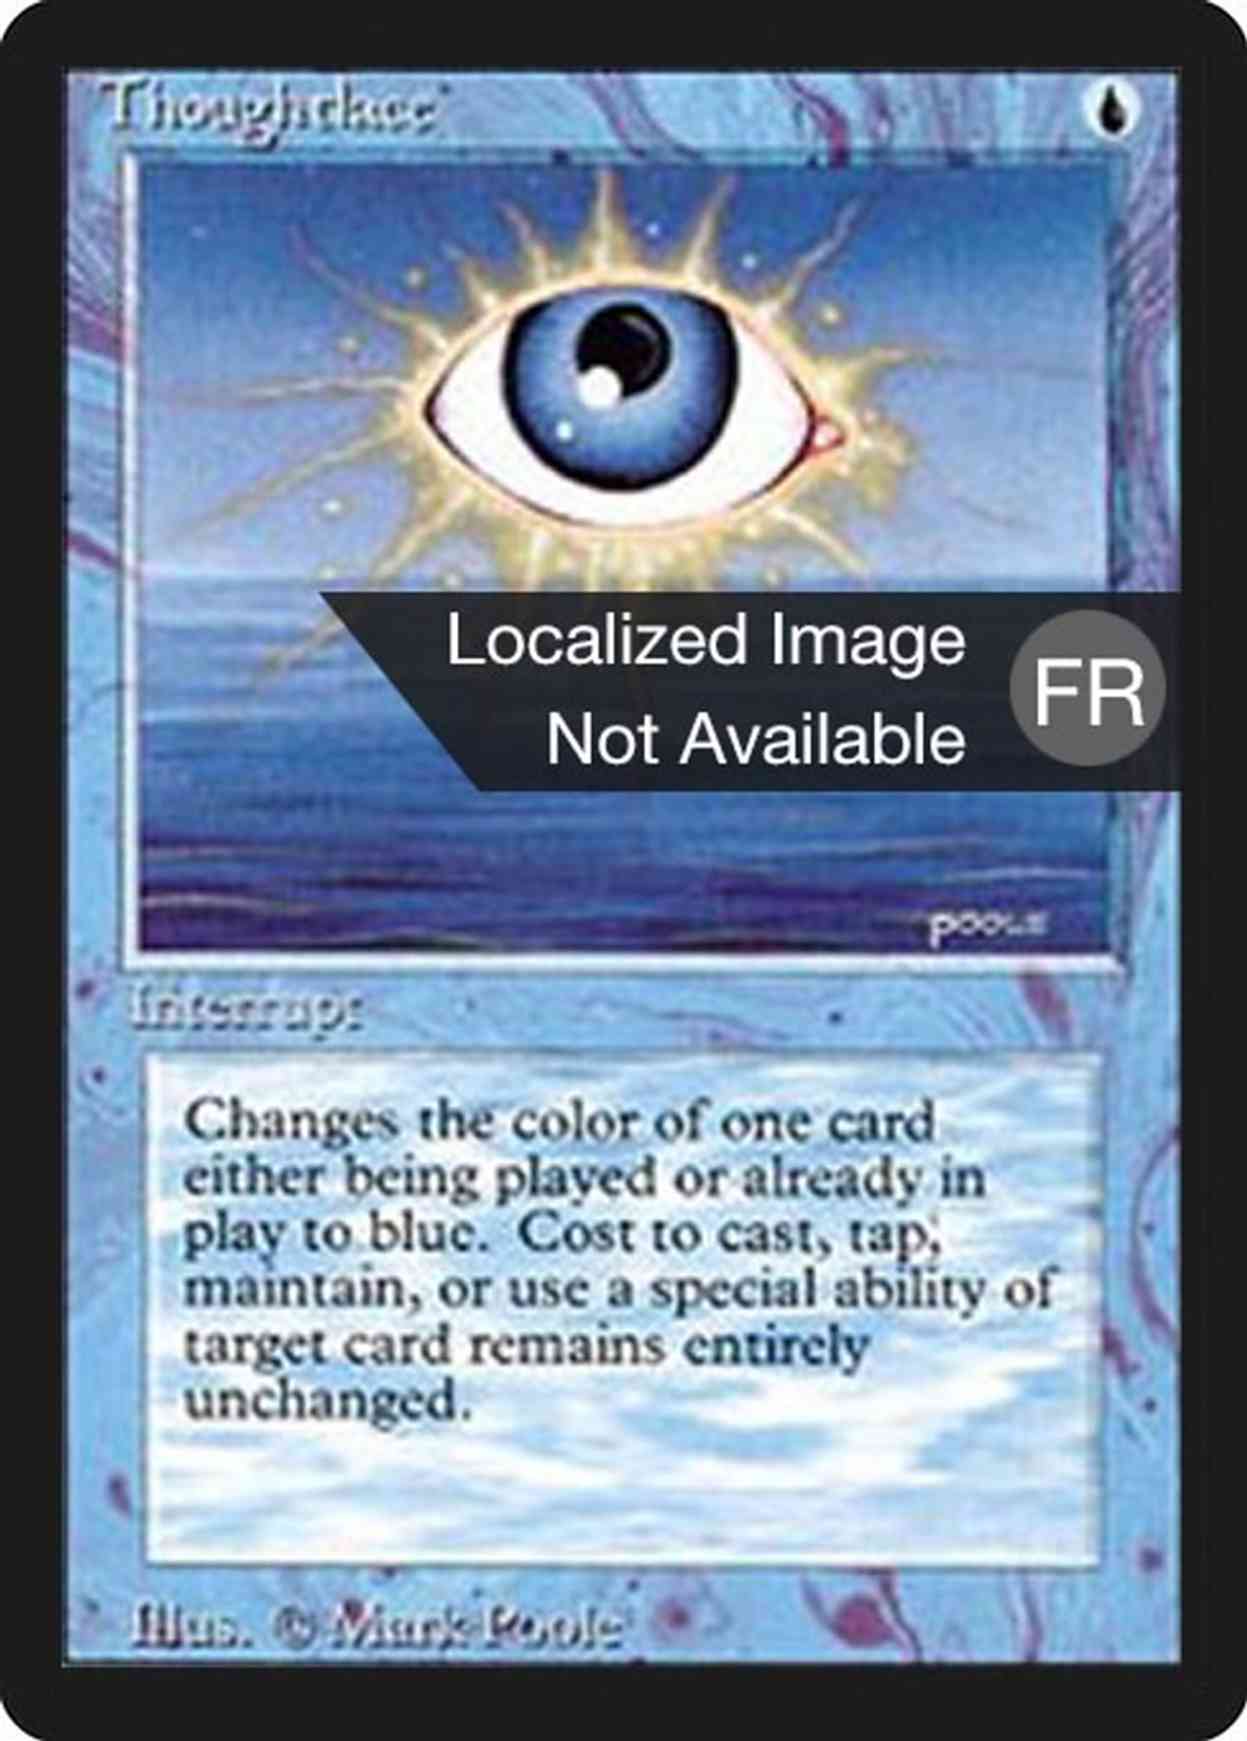 Thoughtlace magic card front